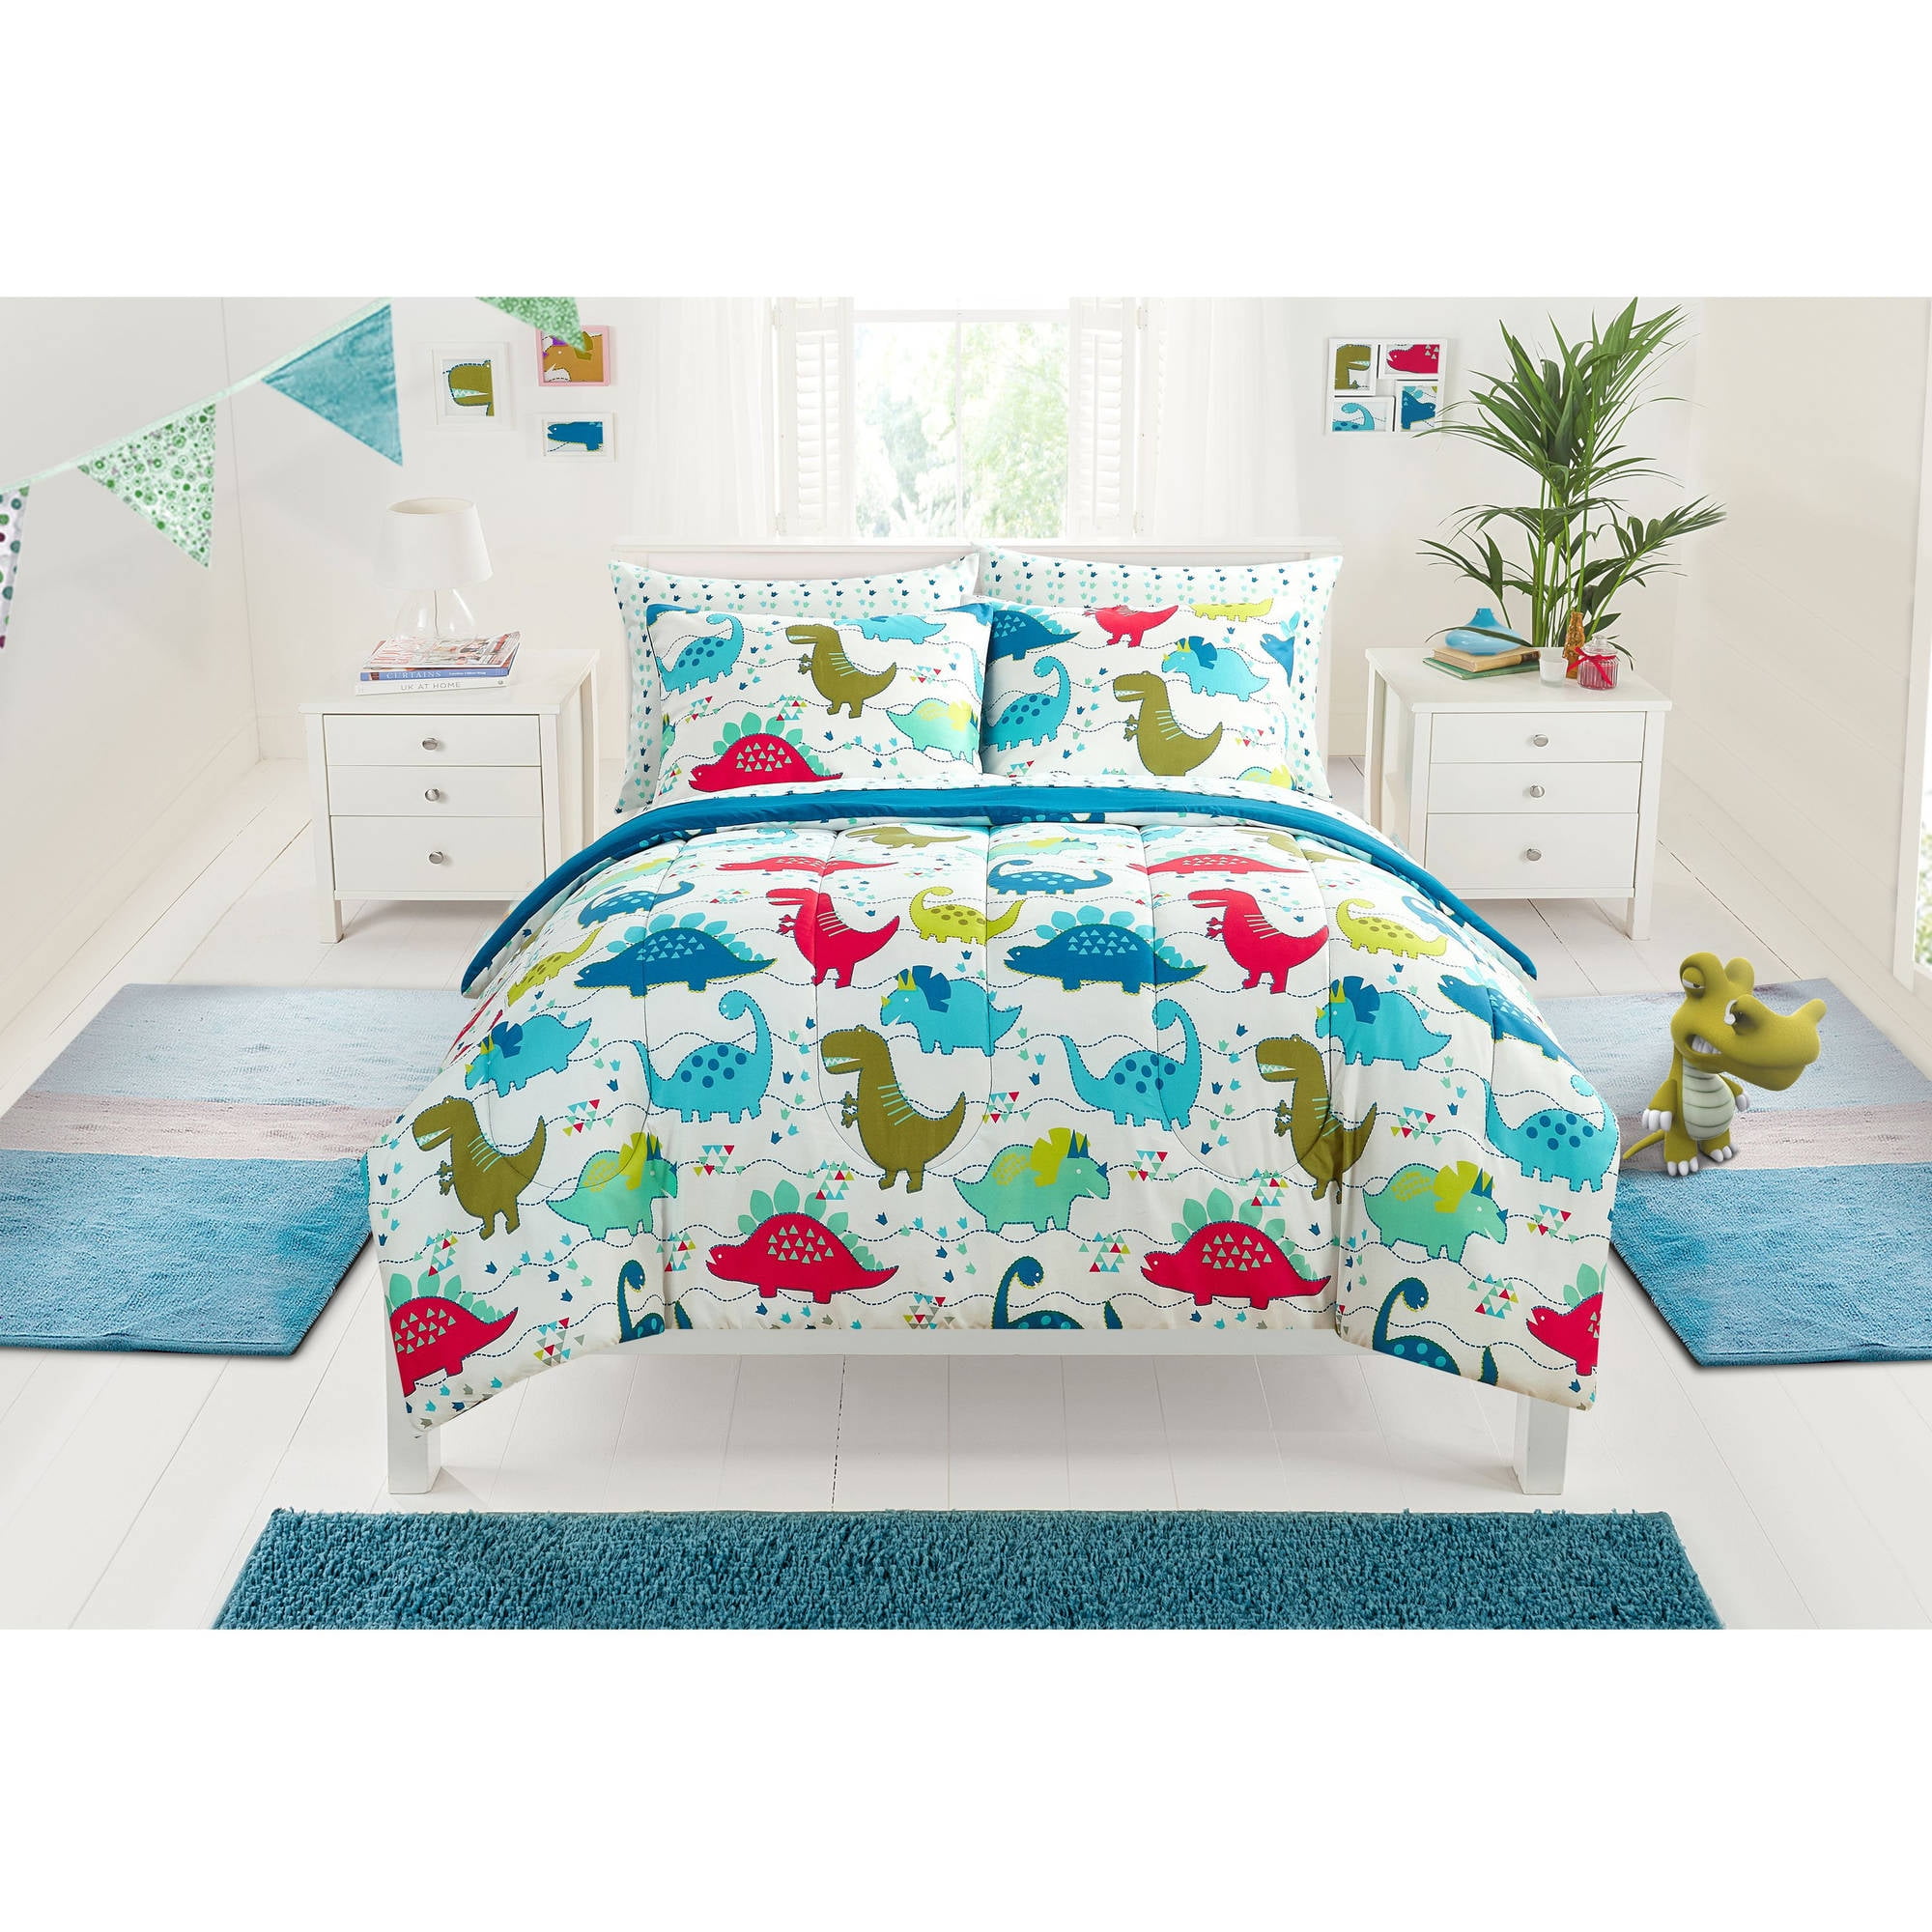 New Boy's Dinosaur Full Queen Size Comforter Set Sheets Bed in a Bag Kid's 